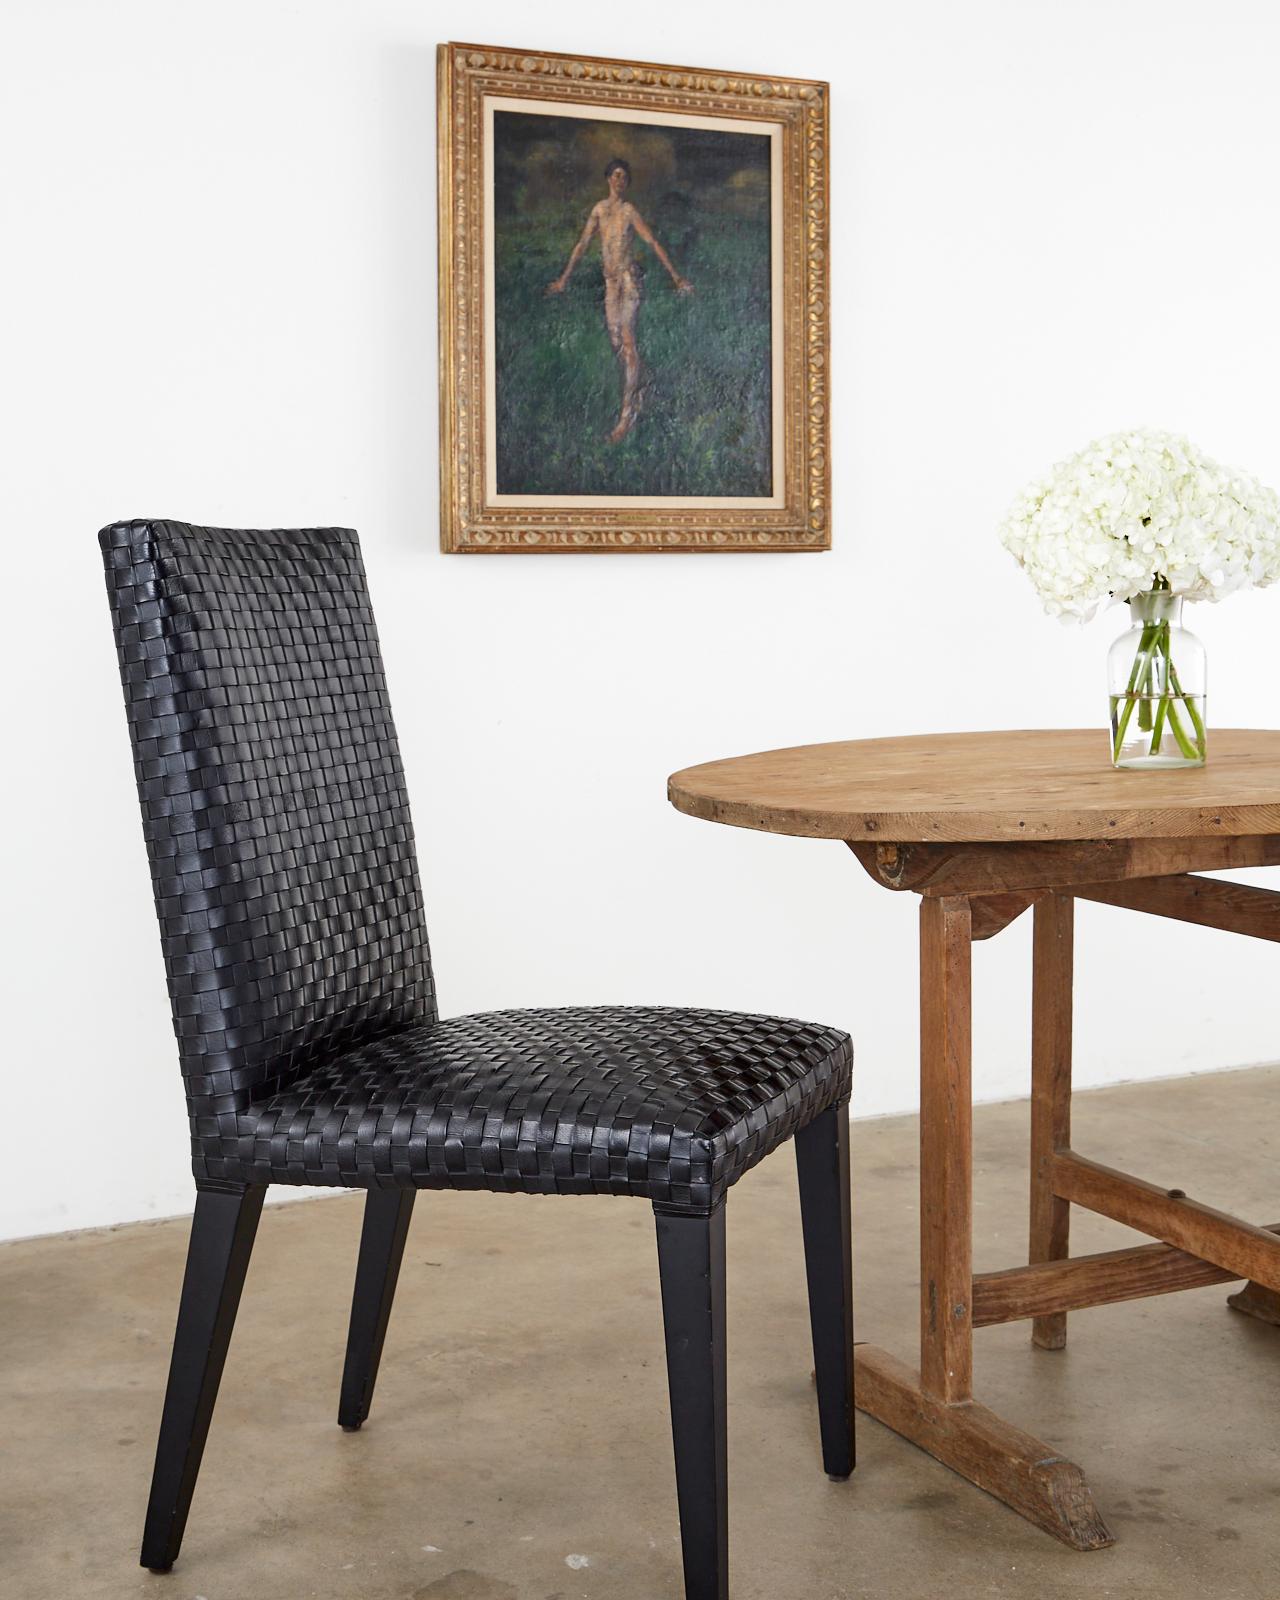 Stylish set of six modern Italian dining chairs featuring a woven or braided black leather upholstery. Beautifully crafted from hardwood frames with an ebonized finish and covered with a leather strap style upholstery. Supported by tapered legs the